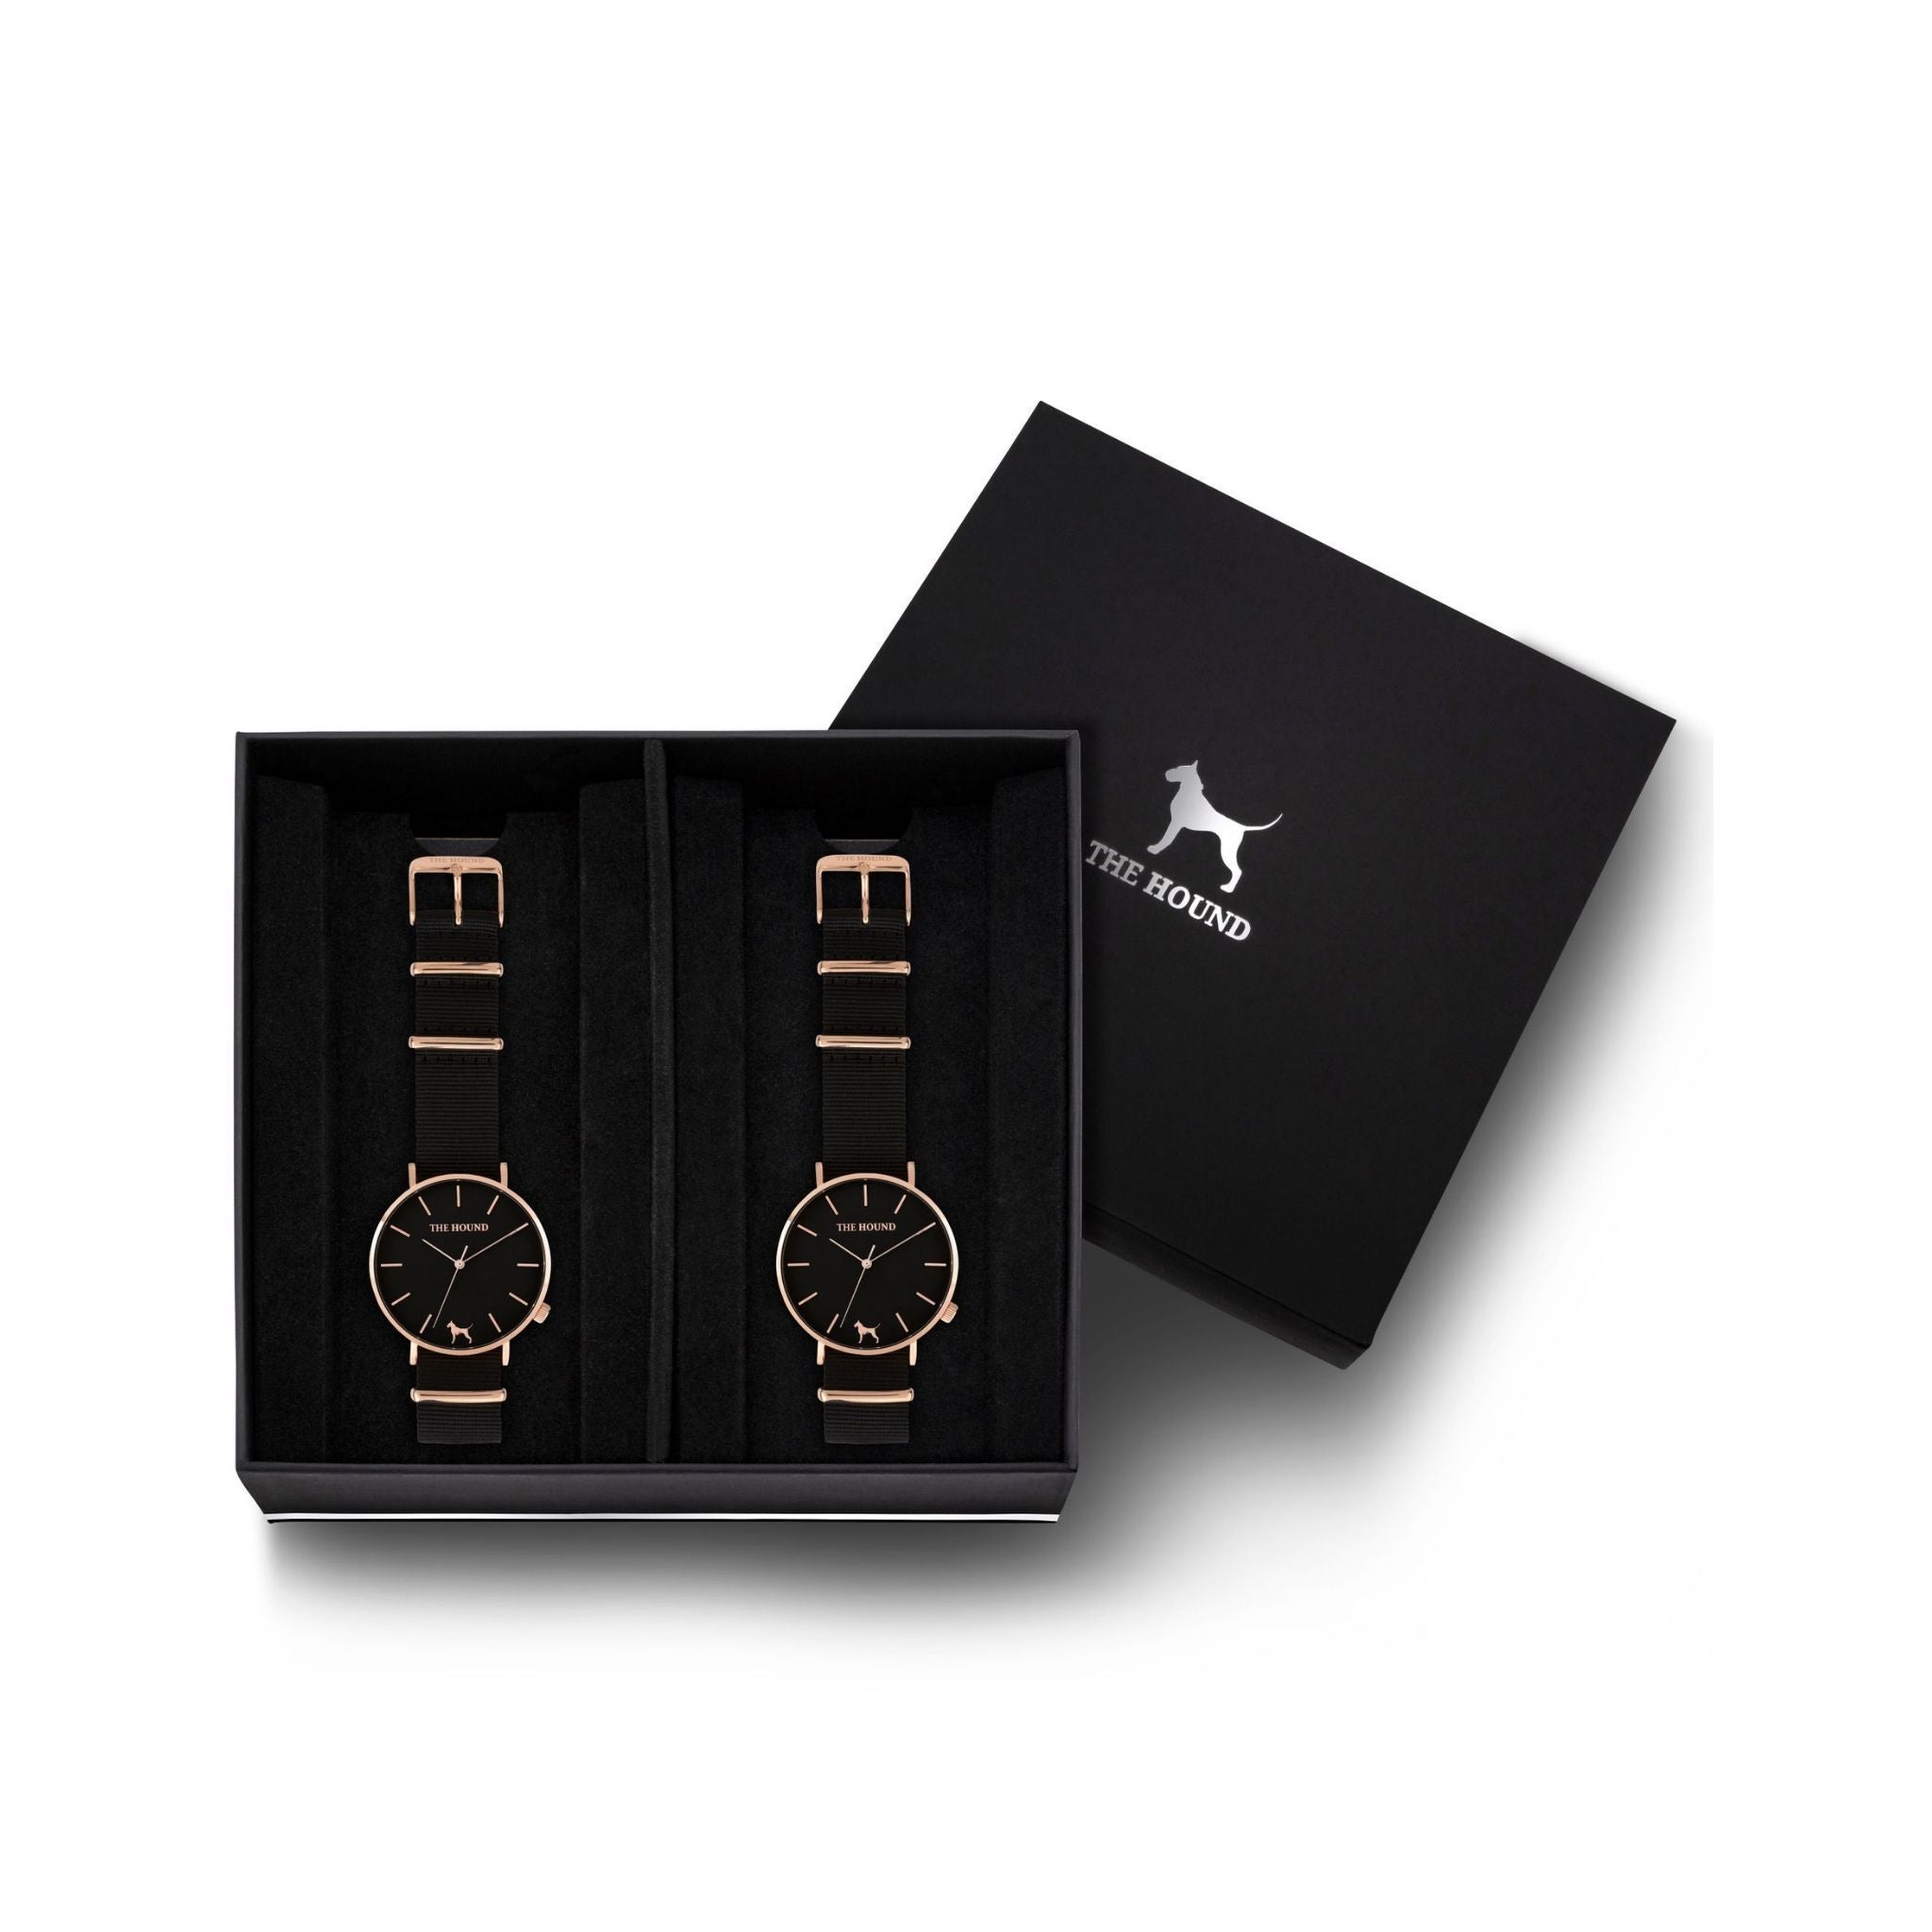 Custom gift set - Rose gold and black watch with black nato band and a rose gold and black watch with black nato leather band